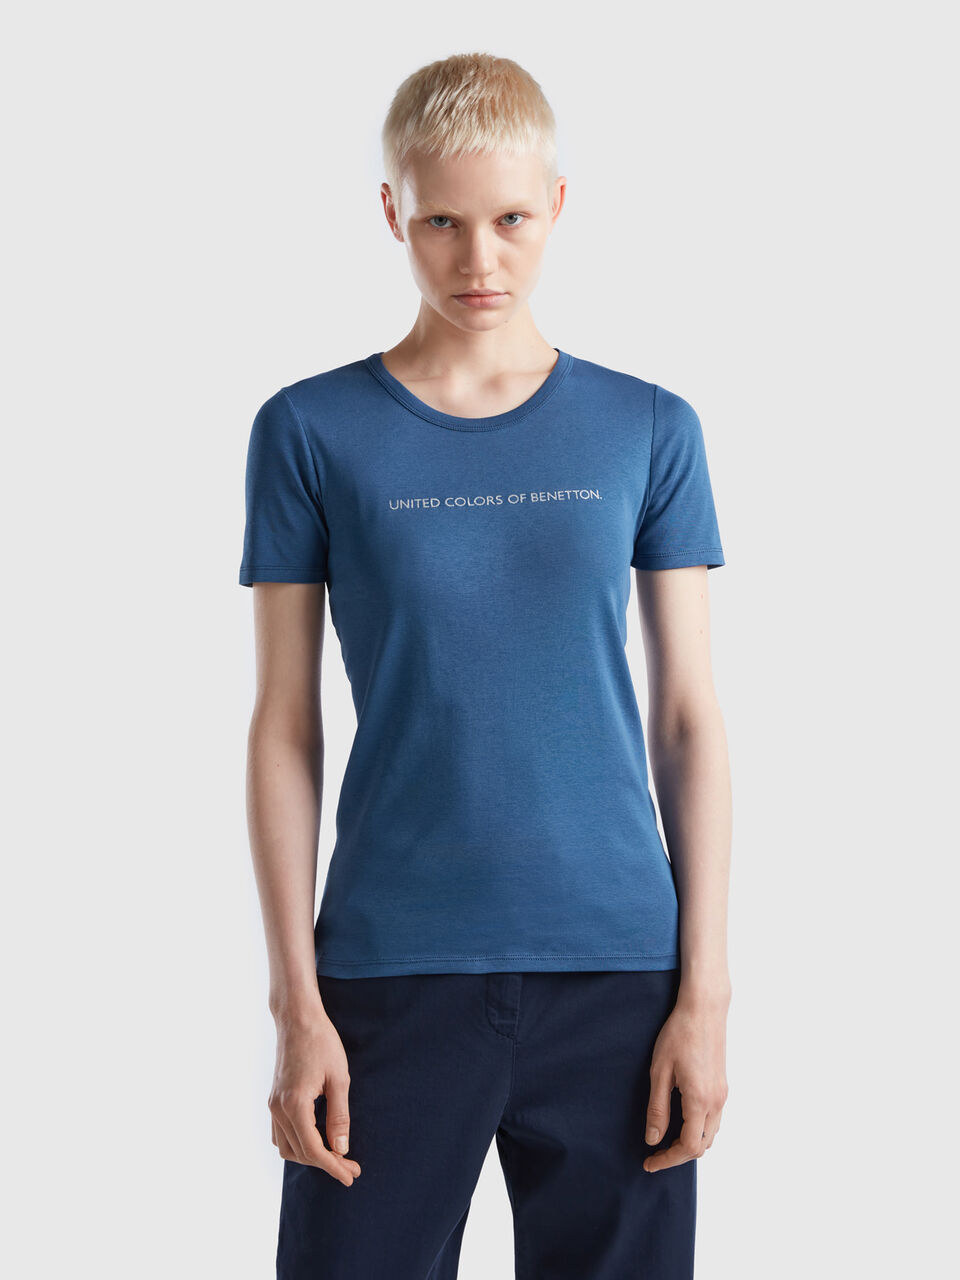 Air Force Benetton T-shirt Blue glitter | - print in with 100% cotton logo